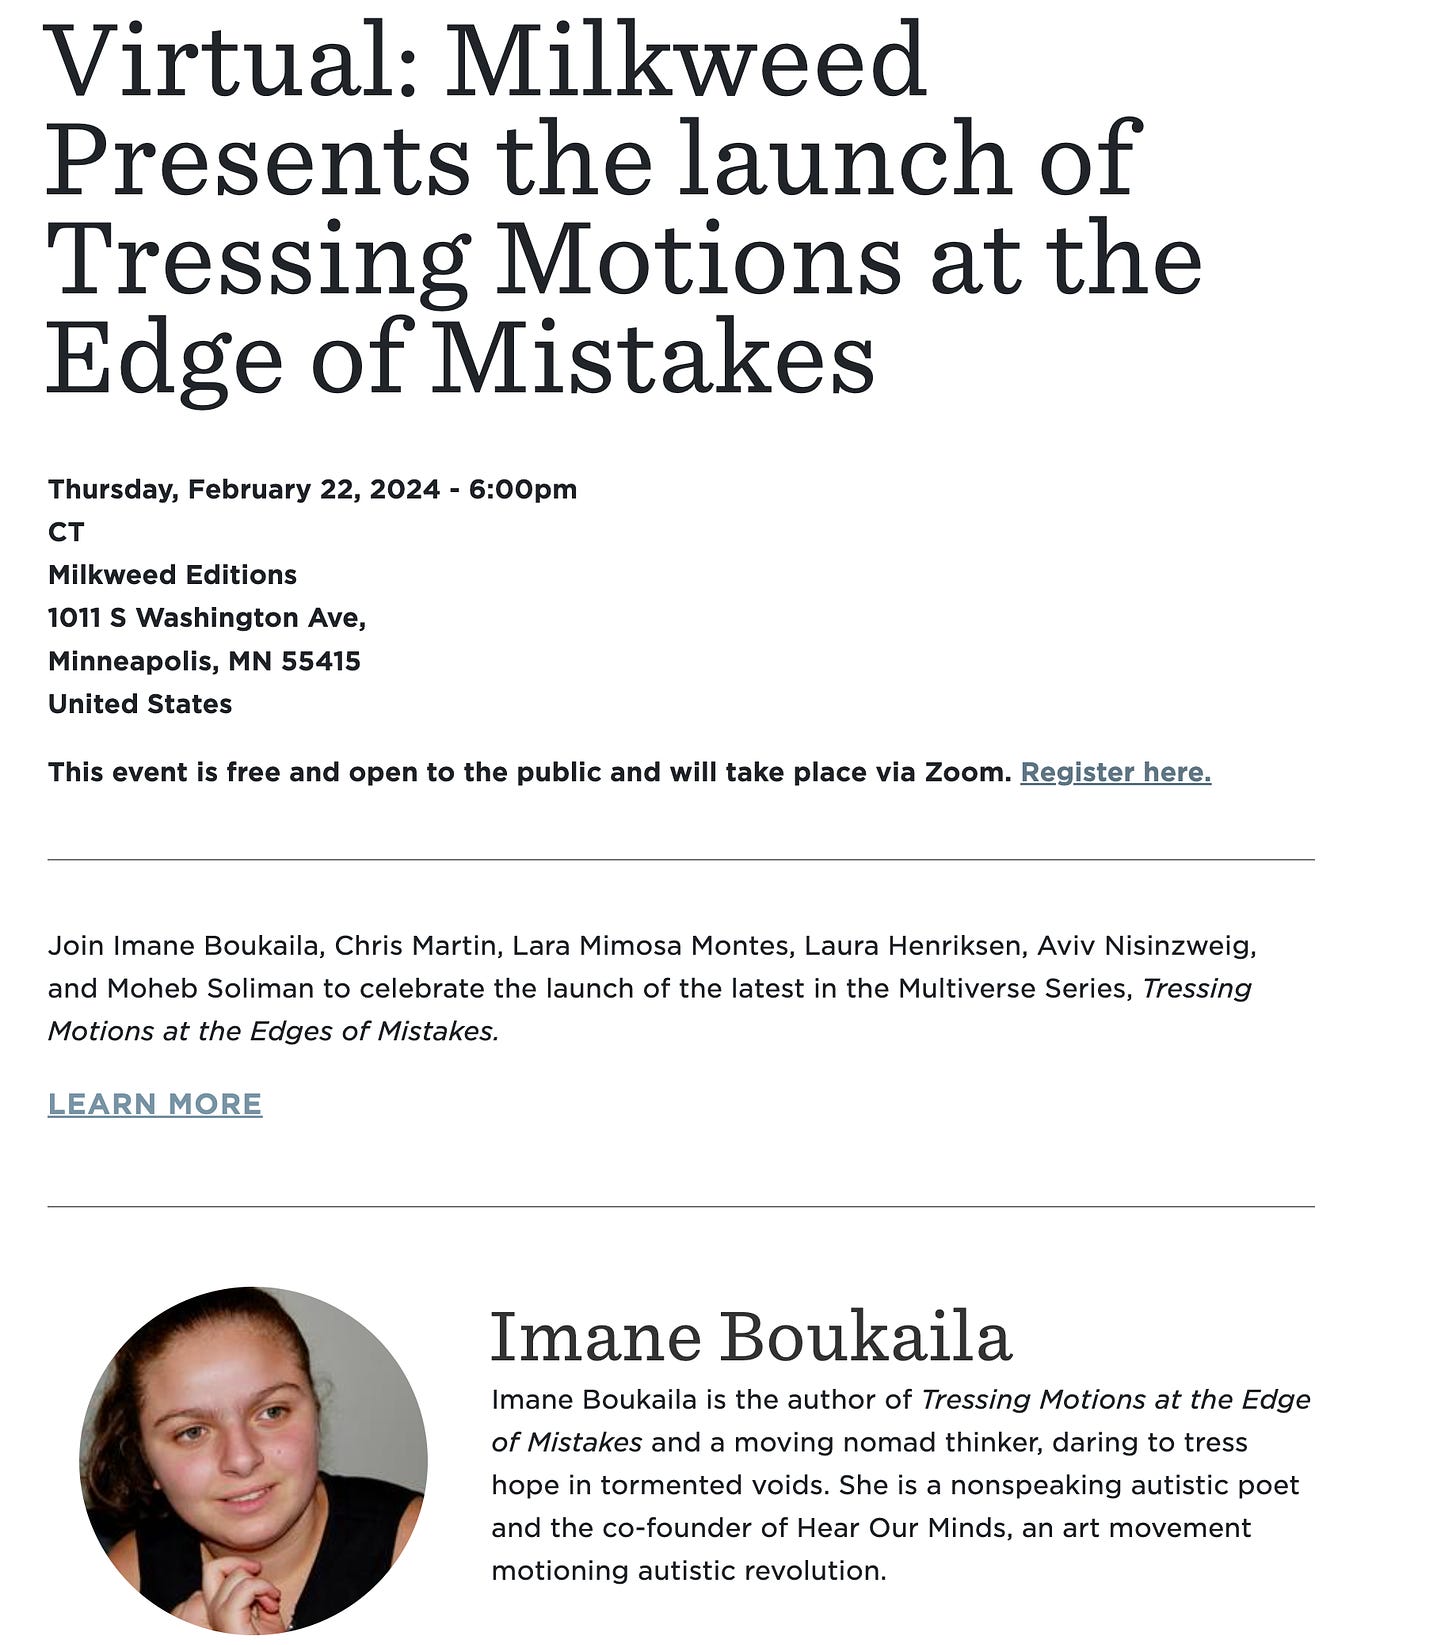 Virtual: Milkweed Presents the launch of Tressing Motions at the Edge of Mistakes Thursday, February 22, 2024 - 6:00pm CT Milkweed Editions 1011 S Washington Ave, Minneapolis, MN 55415 United States  This event is free and open to the public and will take place via Zoom. Register here.   Join Imane Boukaila, Chris Martin, Lara Mimosa Montes, Laura Henriksen, Aviv Nisinzweig, and Moheb Soliman to celebrate the launch of the latest in the Multiverse Series, Tressing Motions at the Edges of Mistakes. 